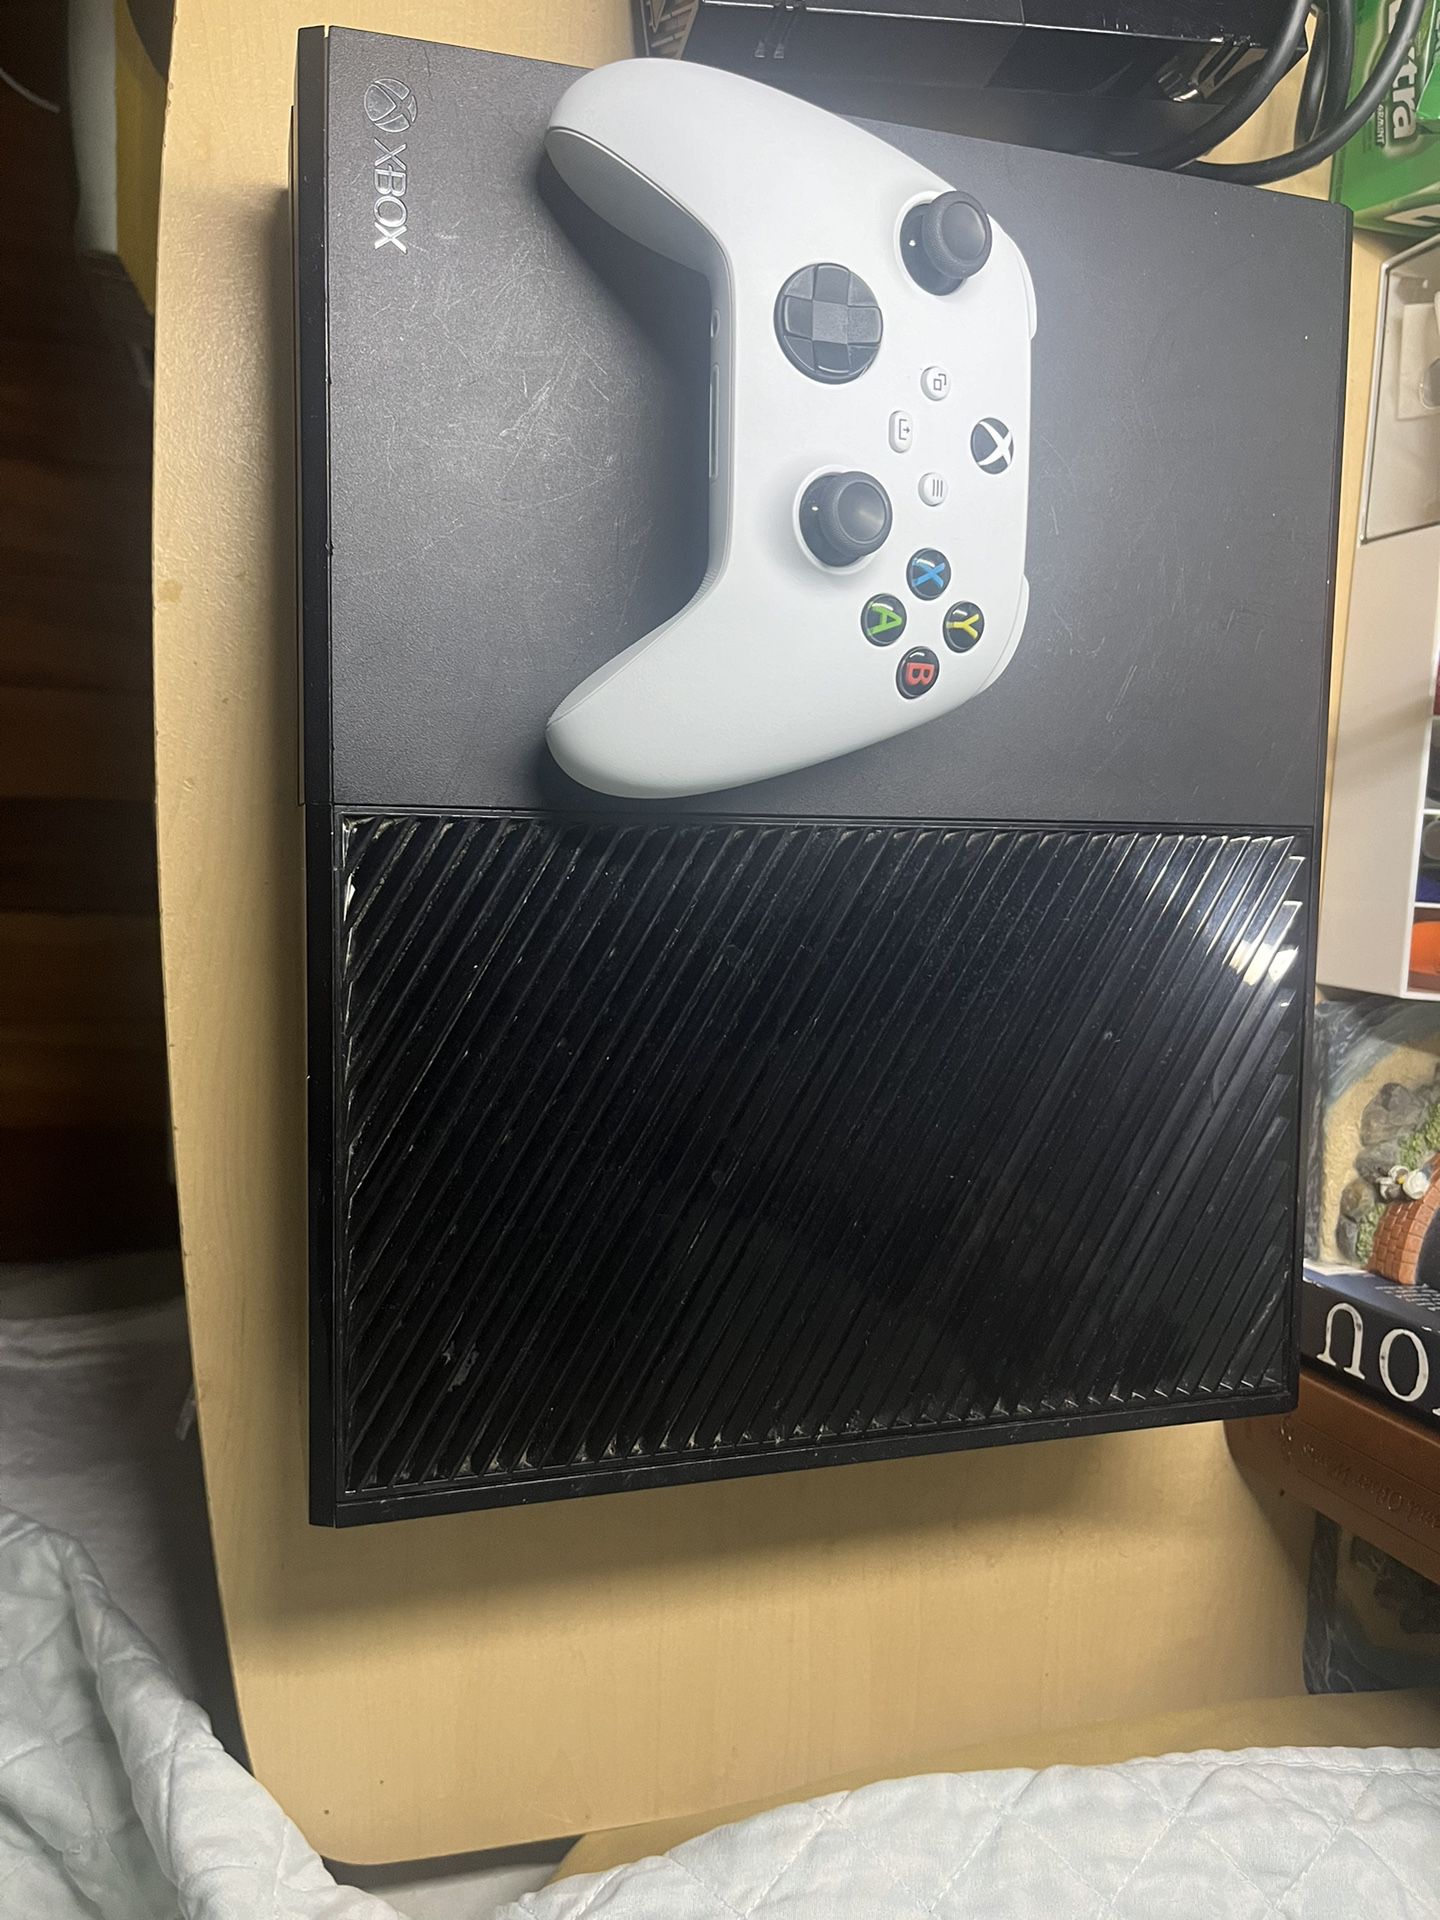 Xbox One with controller, headset, recharge battery and station.